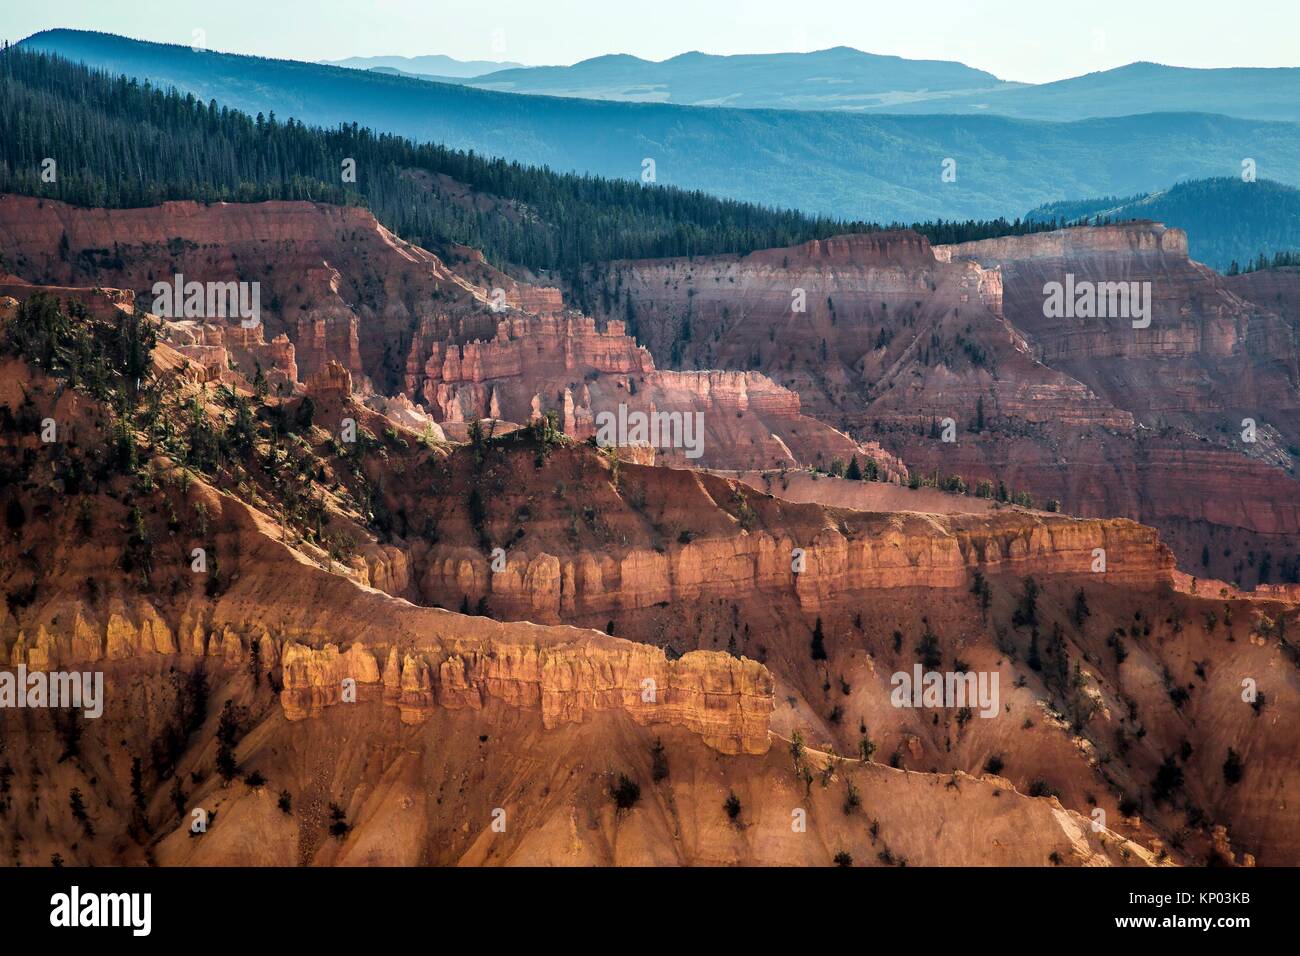 Erosion and time have shaped the sandstone landscape at Cedar Breaks National Monument in Southern Utah, USA. Stock Photo